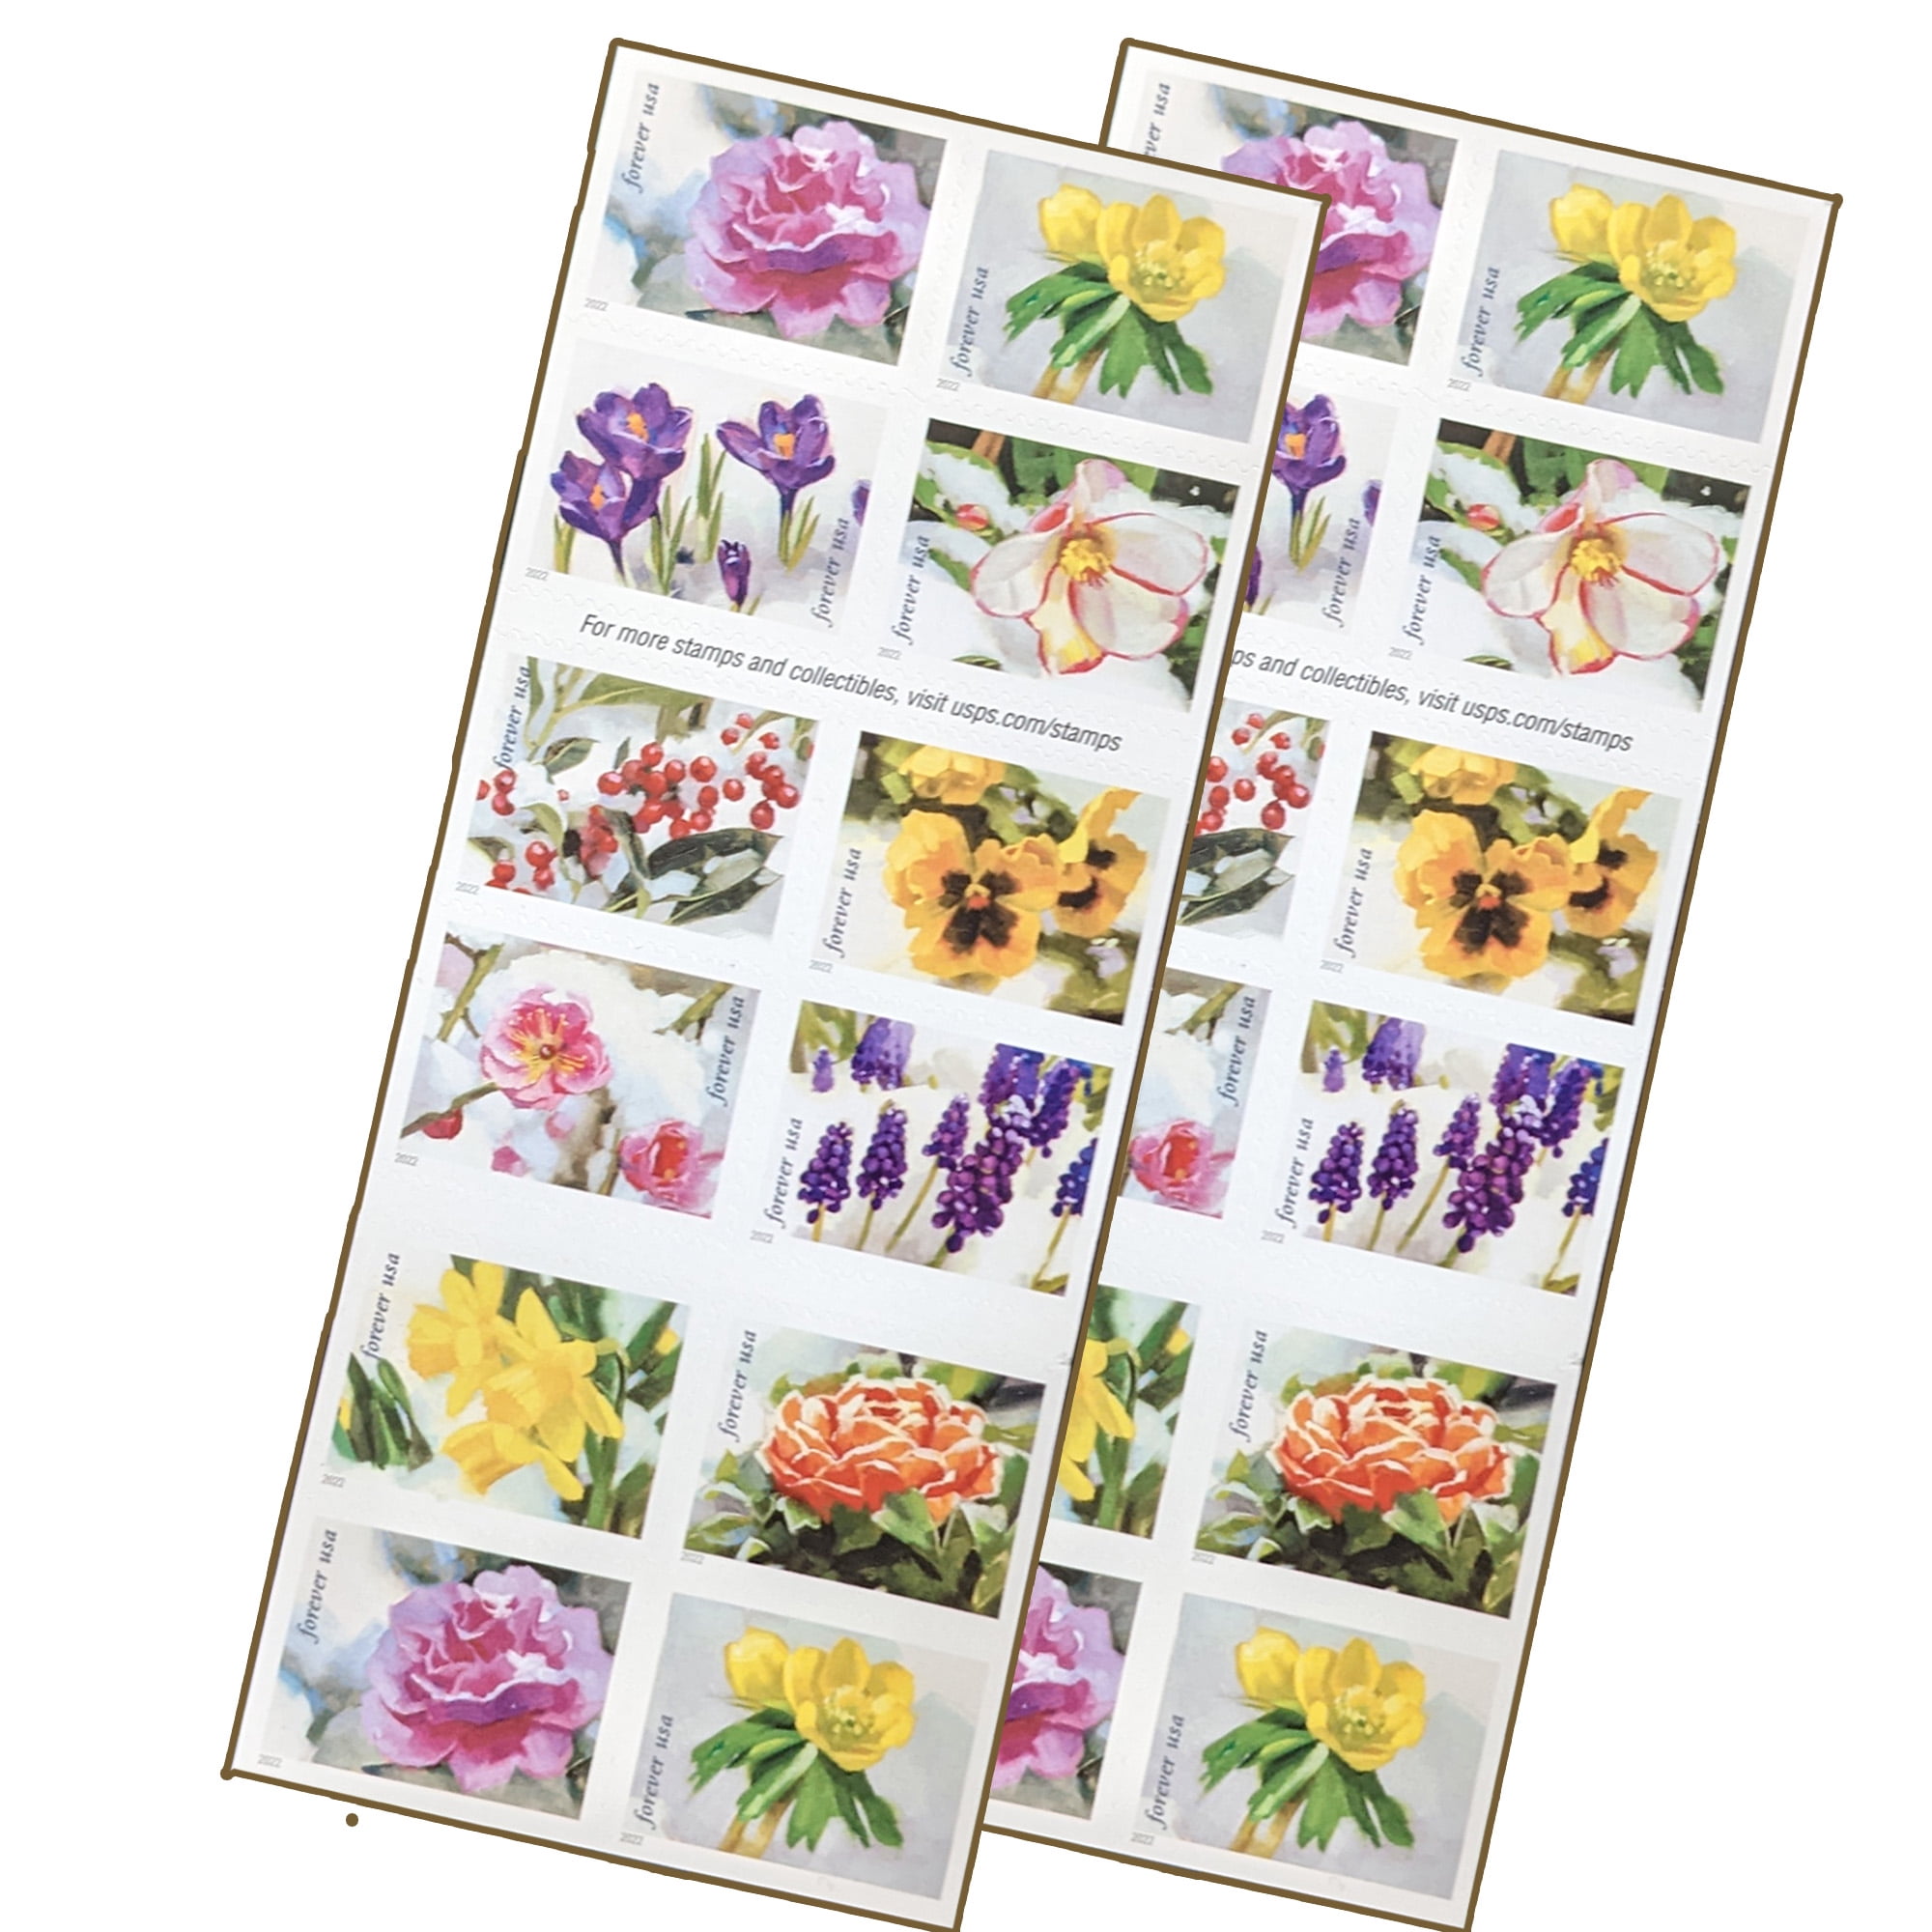 USPS Snowy Garden Beauty Forever Self-Adhesive Postage Stamps, Wedding,  Love, Celebration, Holiday, Winter, Flower (1 Booklet, 20 Stamps)